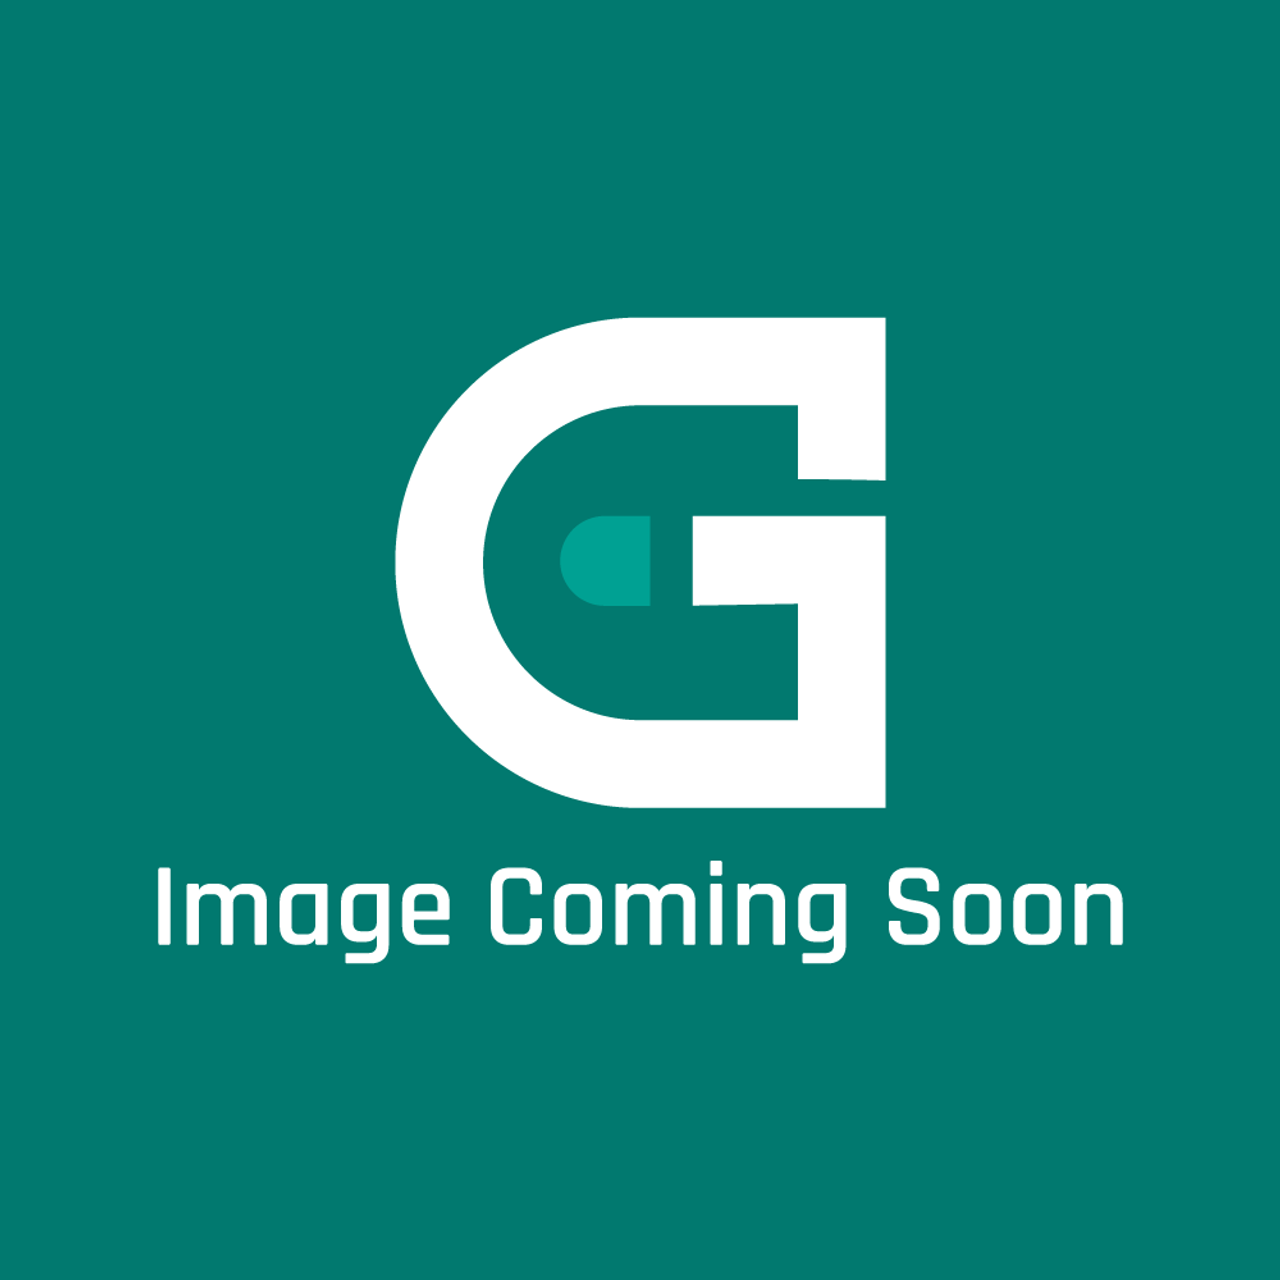 AGA Marvel AE4M998928 - In Line Fuse Holder (414-601) - Image Coming Soon!